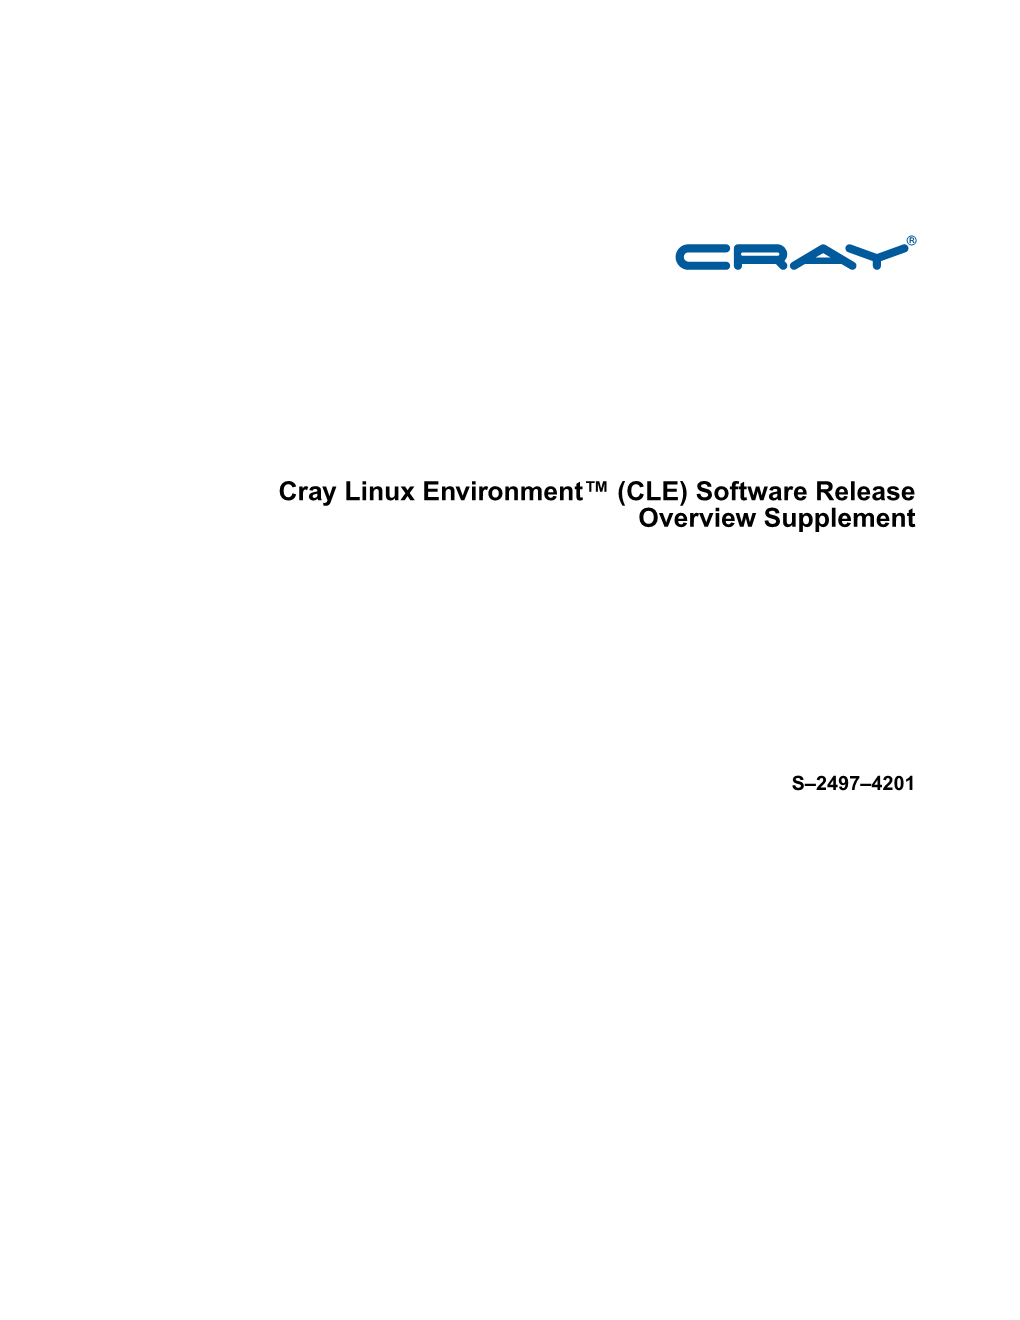 Cray Linux Environment™ (CLE) Software Release Overview Supplement